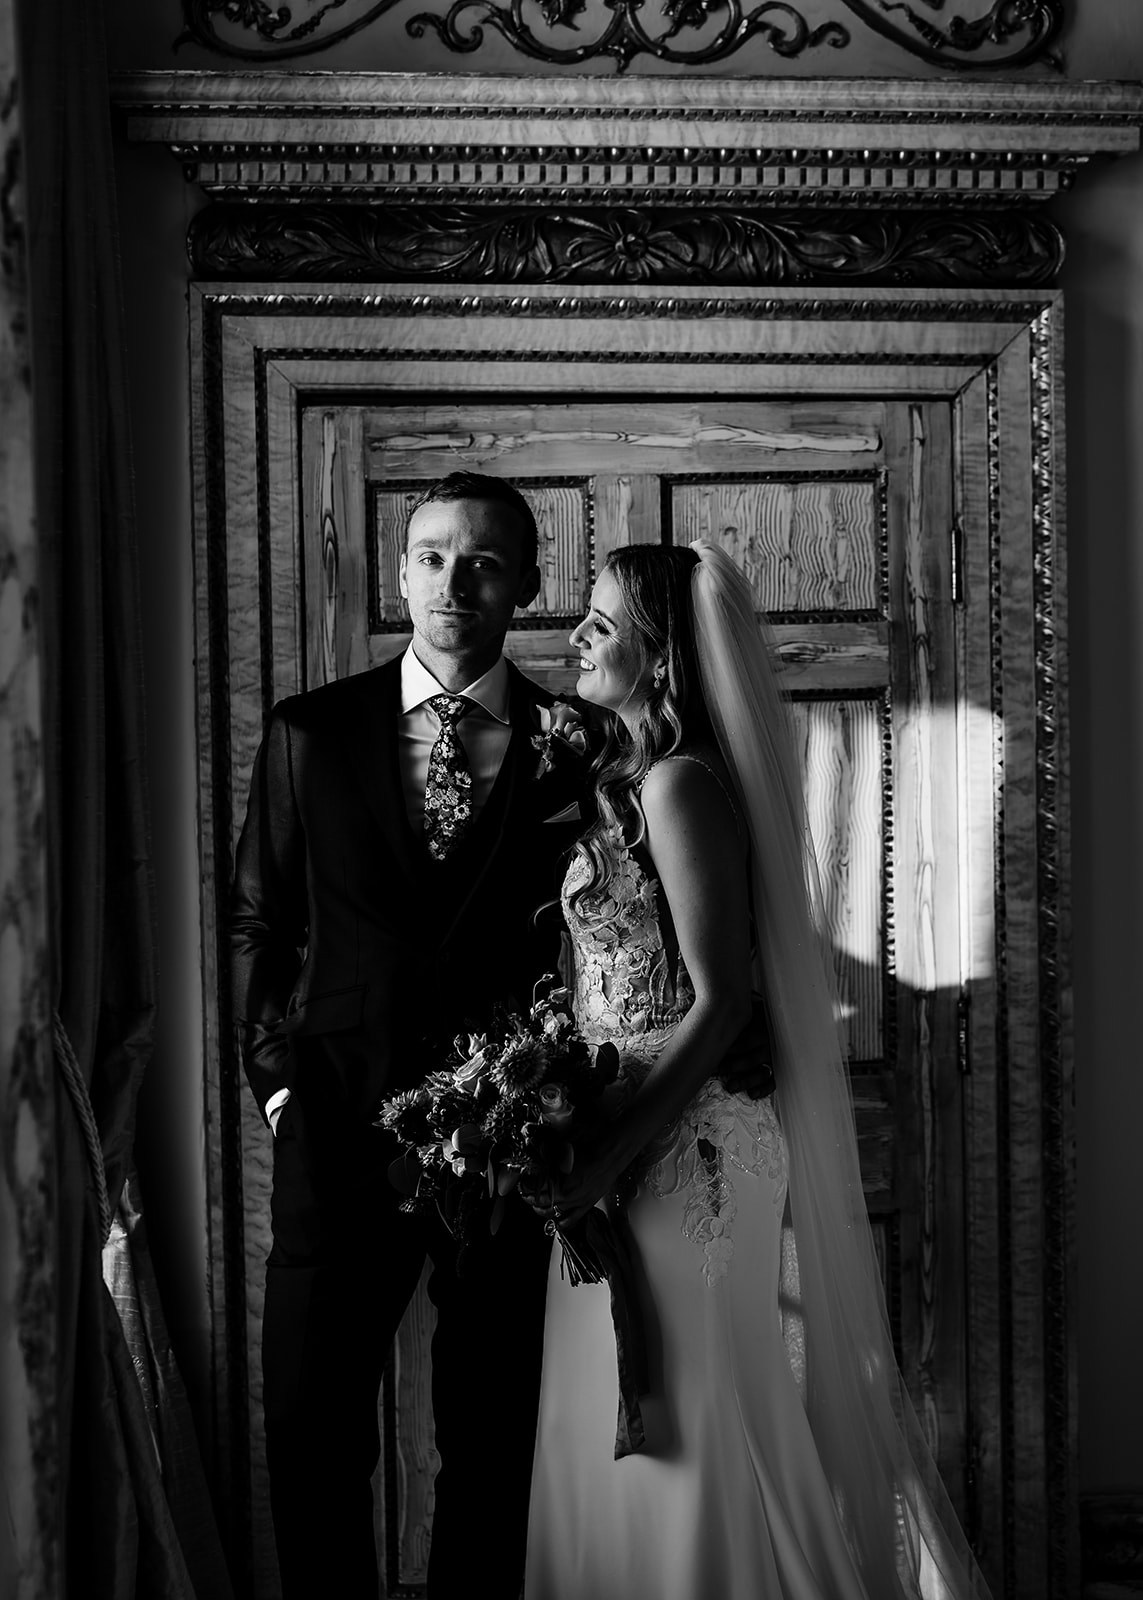 Bride and groom portrait stood in window at gosfield hall